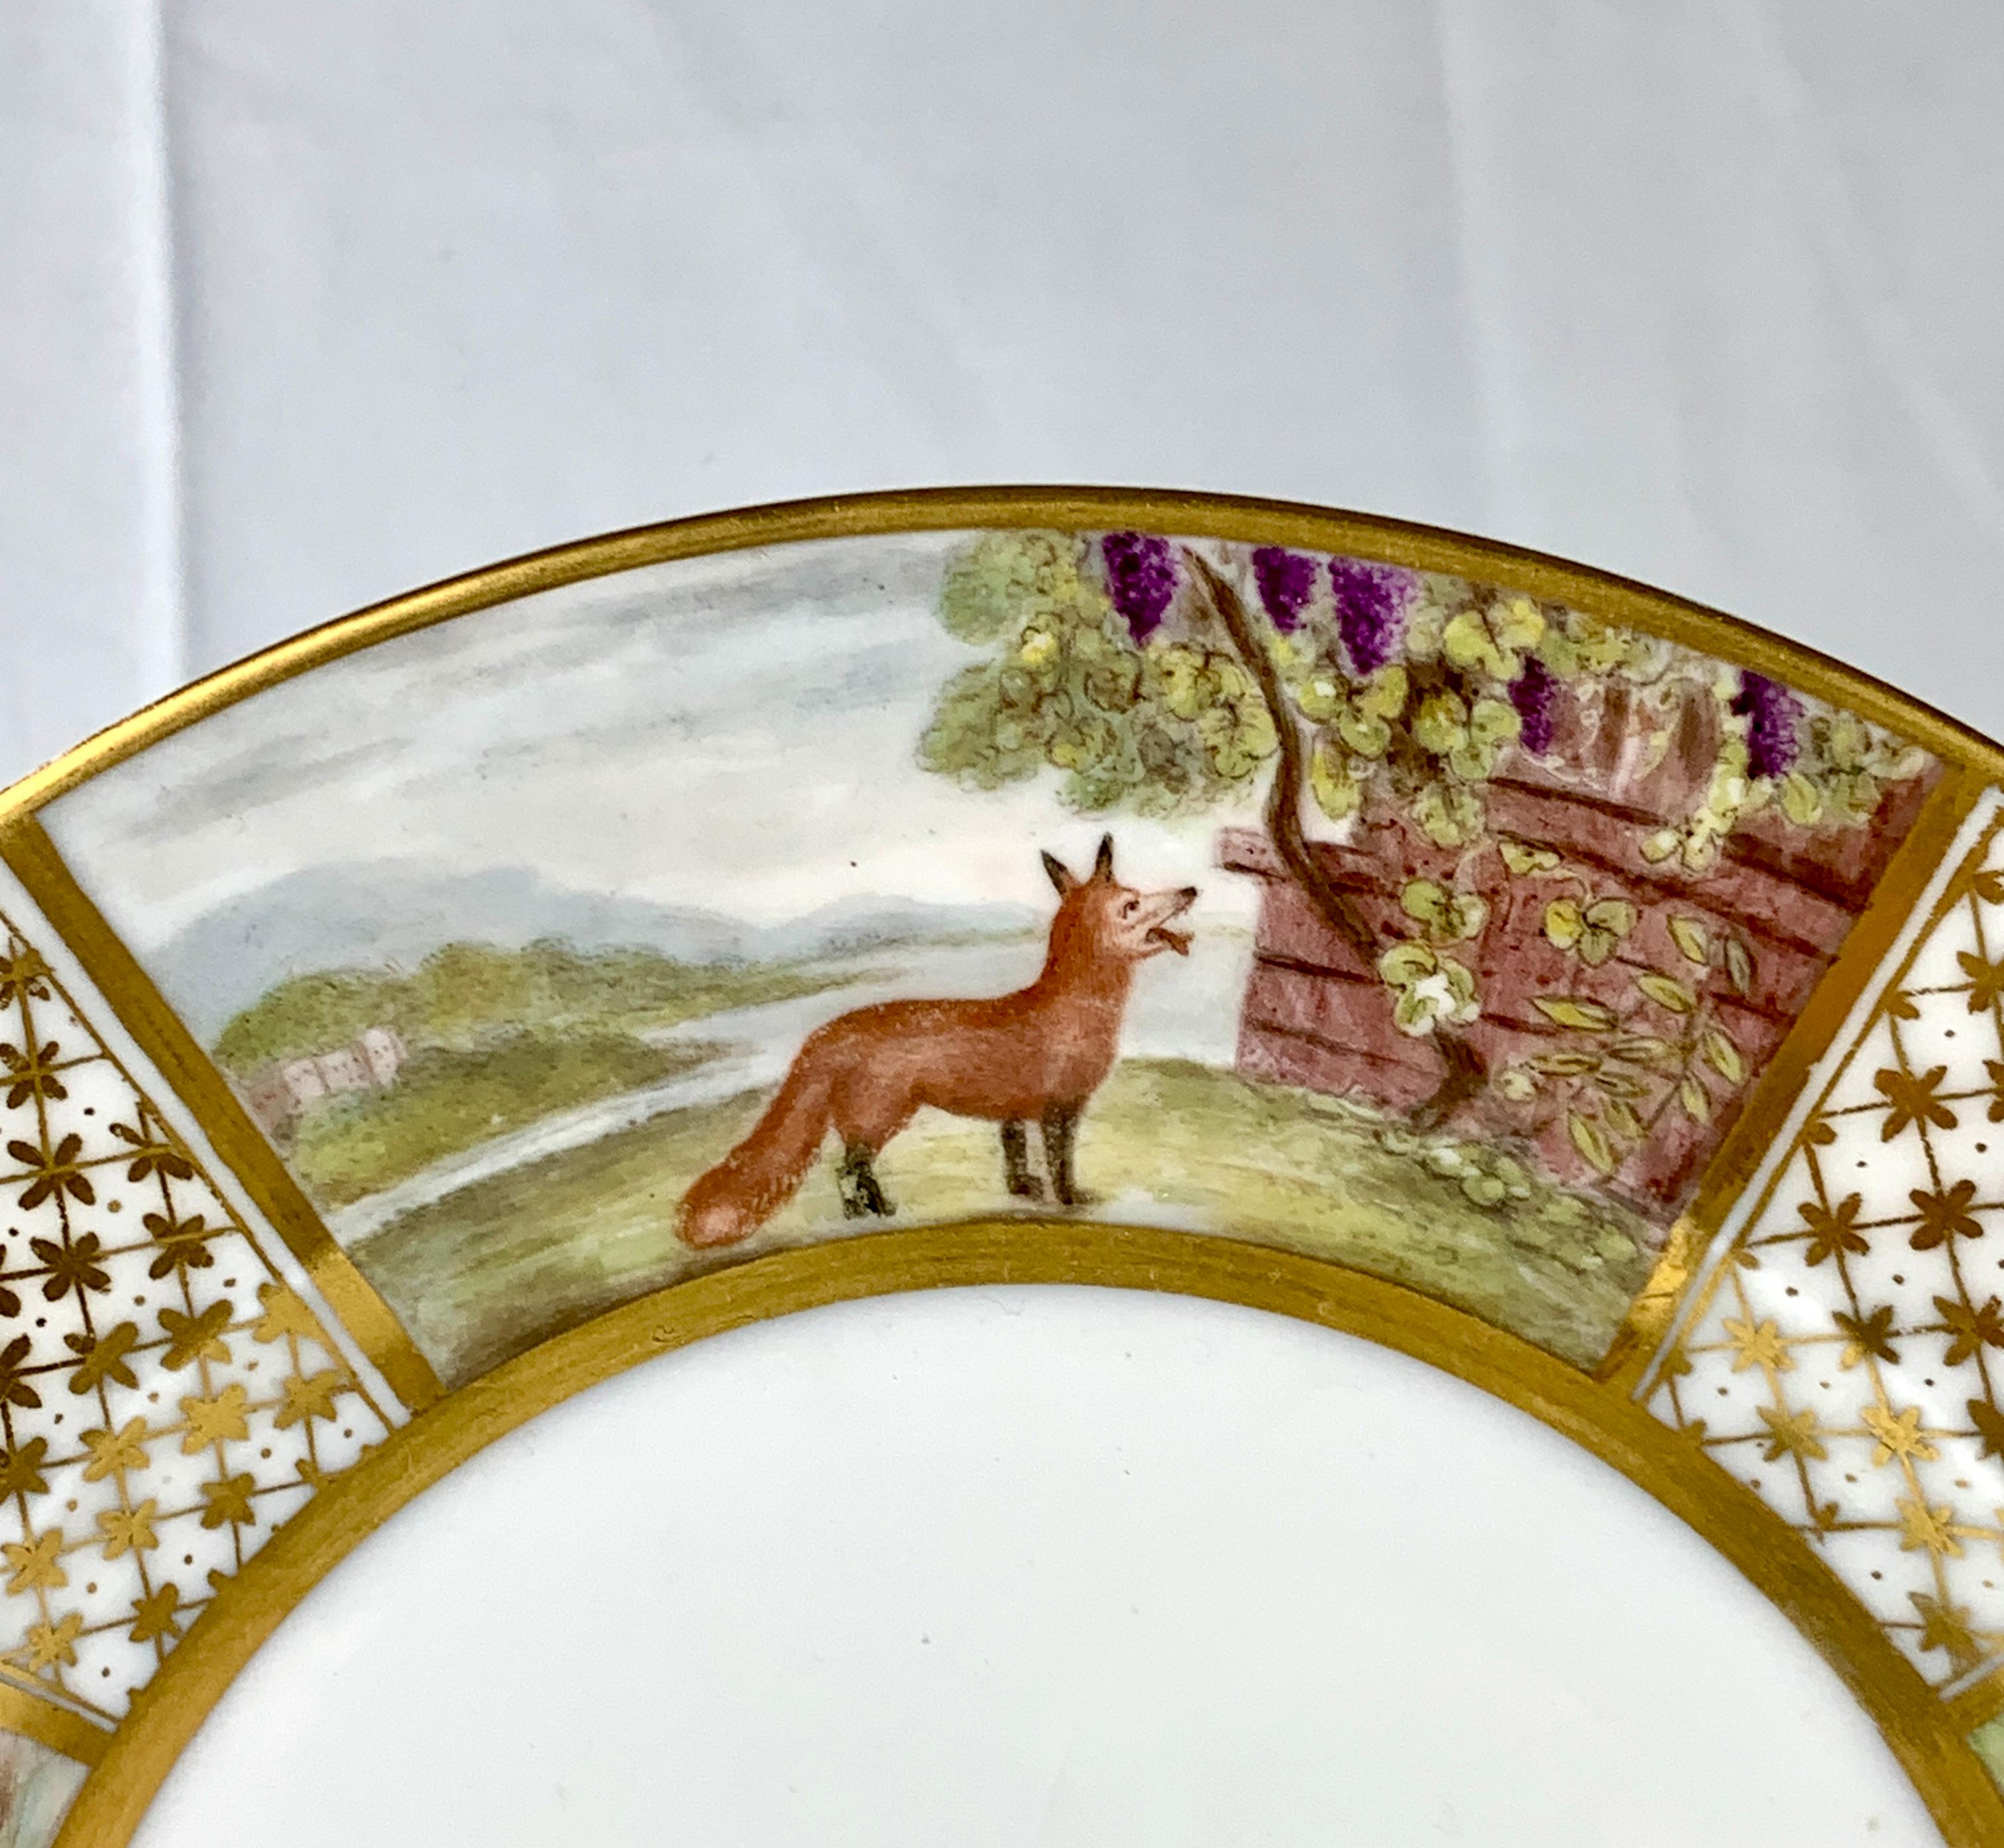 Four beautiful scenes from Aesop's fables adorn this marvelous plate.
It was made in France circa 1825.
Each scene captures the essence of the fable it depicts, transporting the viewer into the world of these timeless stories.
1) The Fox & the